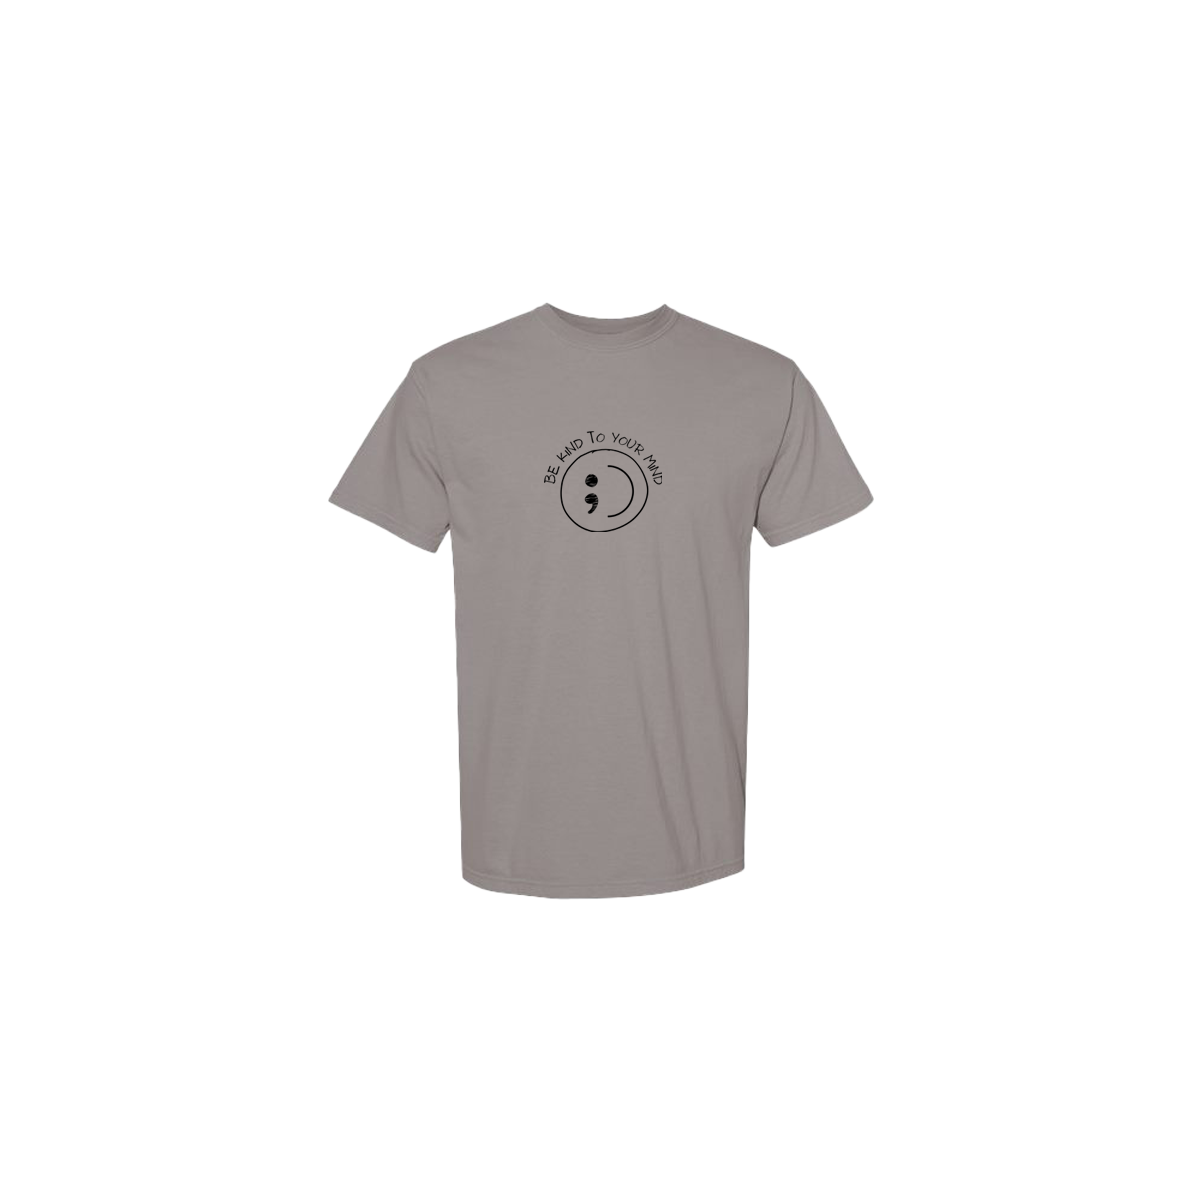 Be Kind To Your Mind Smiley Face Embroidered Grey Tshirt - Mental Health Awareness Clothing